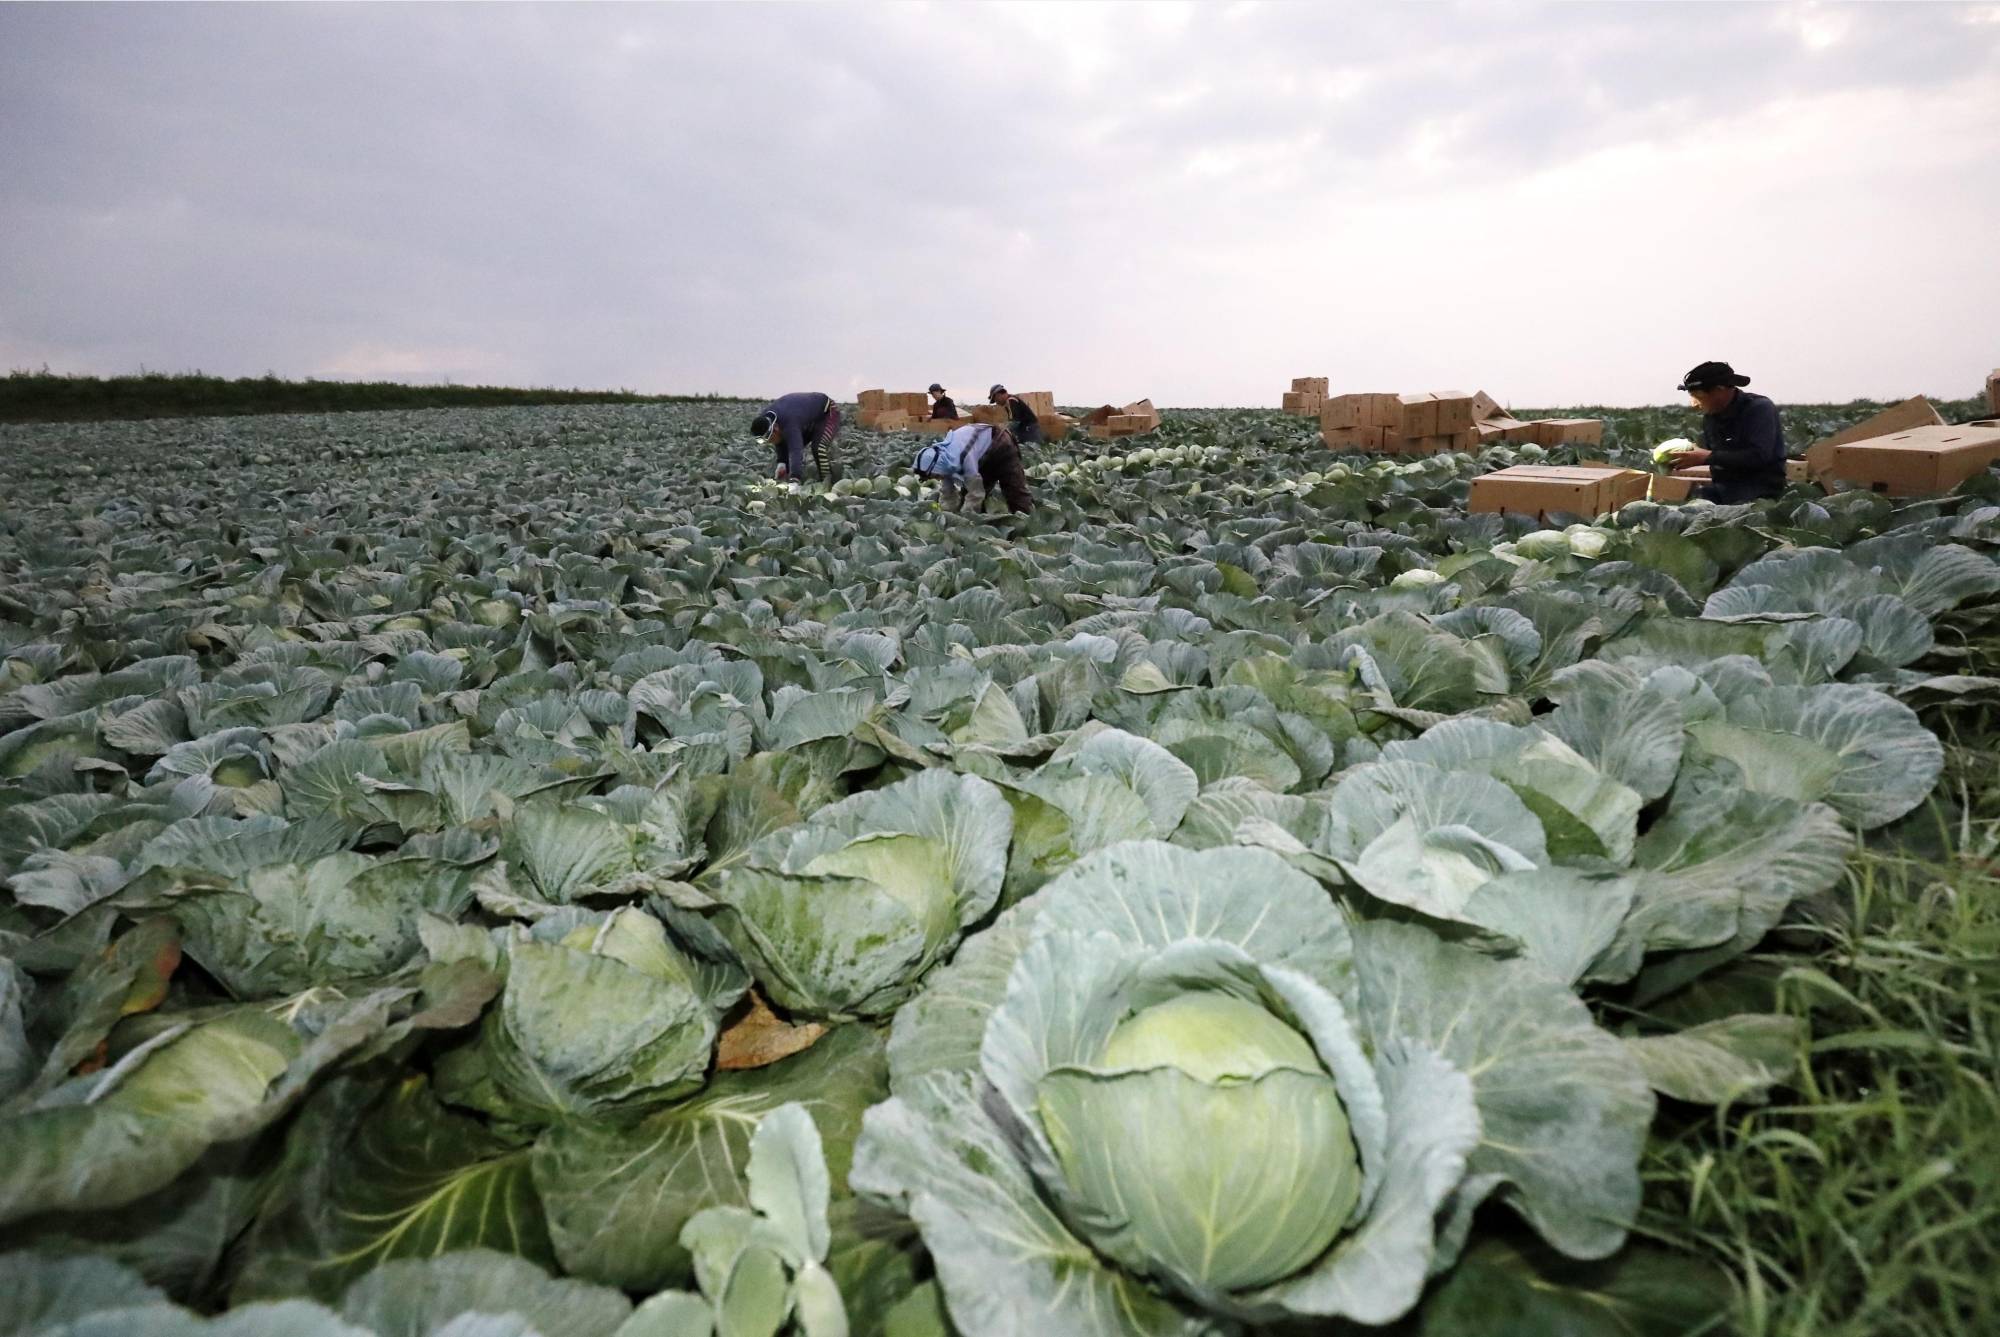 Farmers work in a cabbage field in the village of Tsumagoi, Gunma Prefecture. The COVID-19 pandemic has disrupted the inbound flow of foreign trainees, causing labor shortages in Japan's agricultural sector. | KYODO